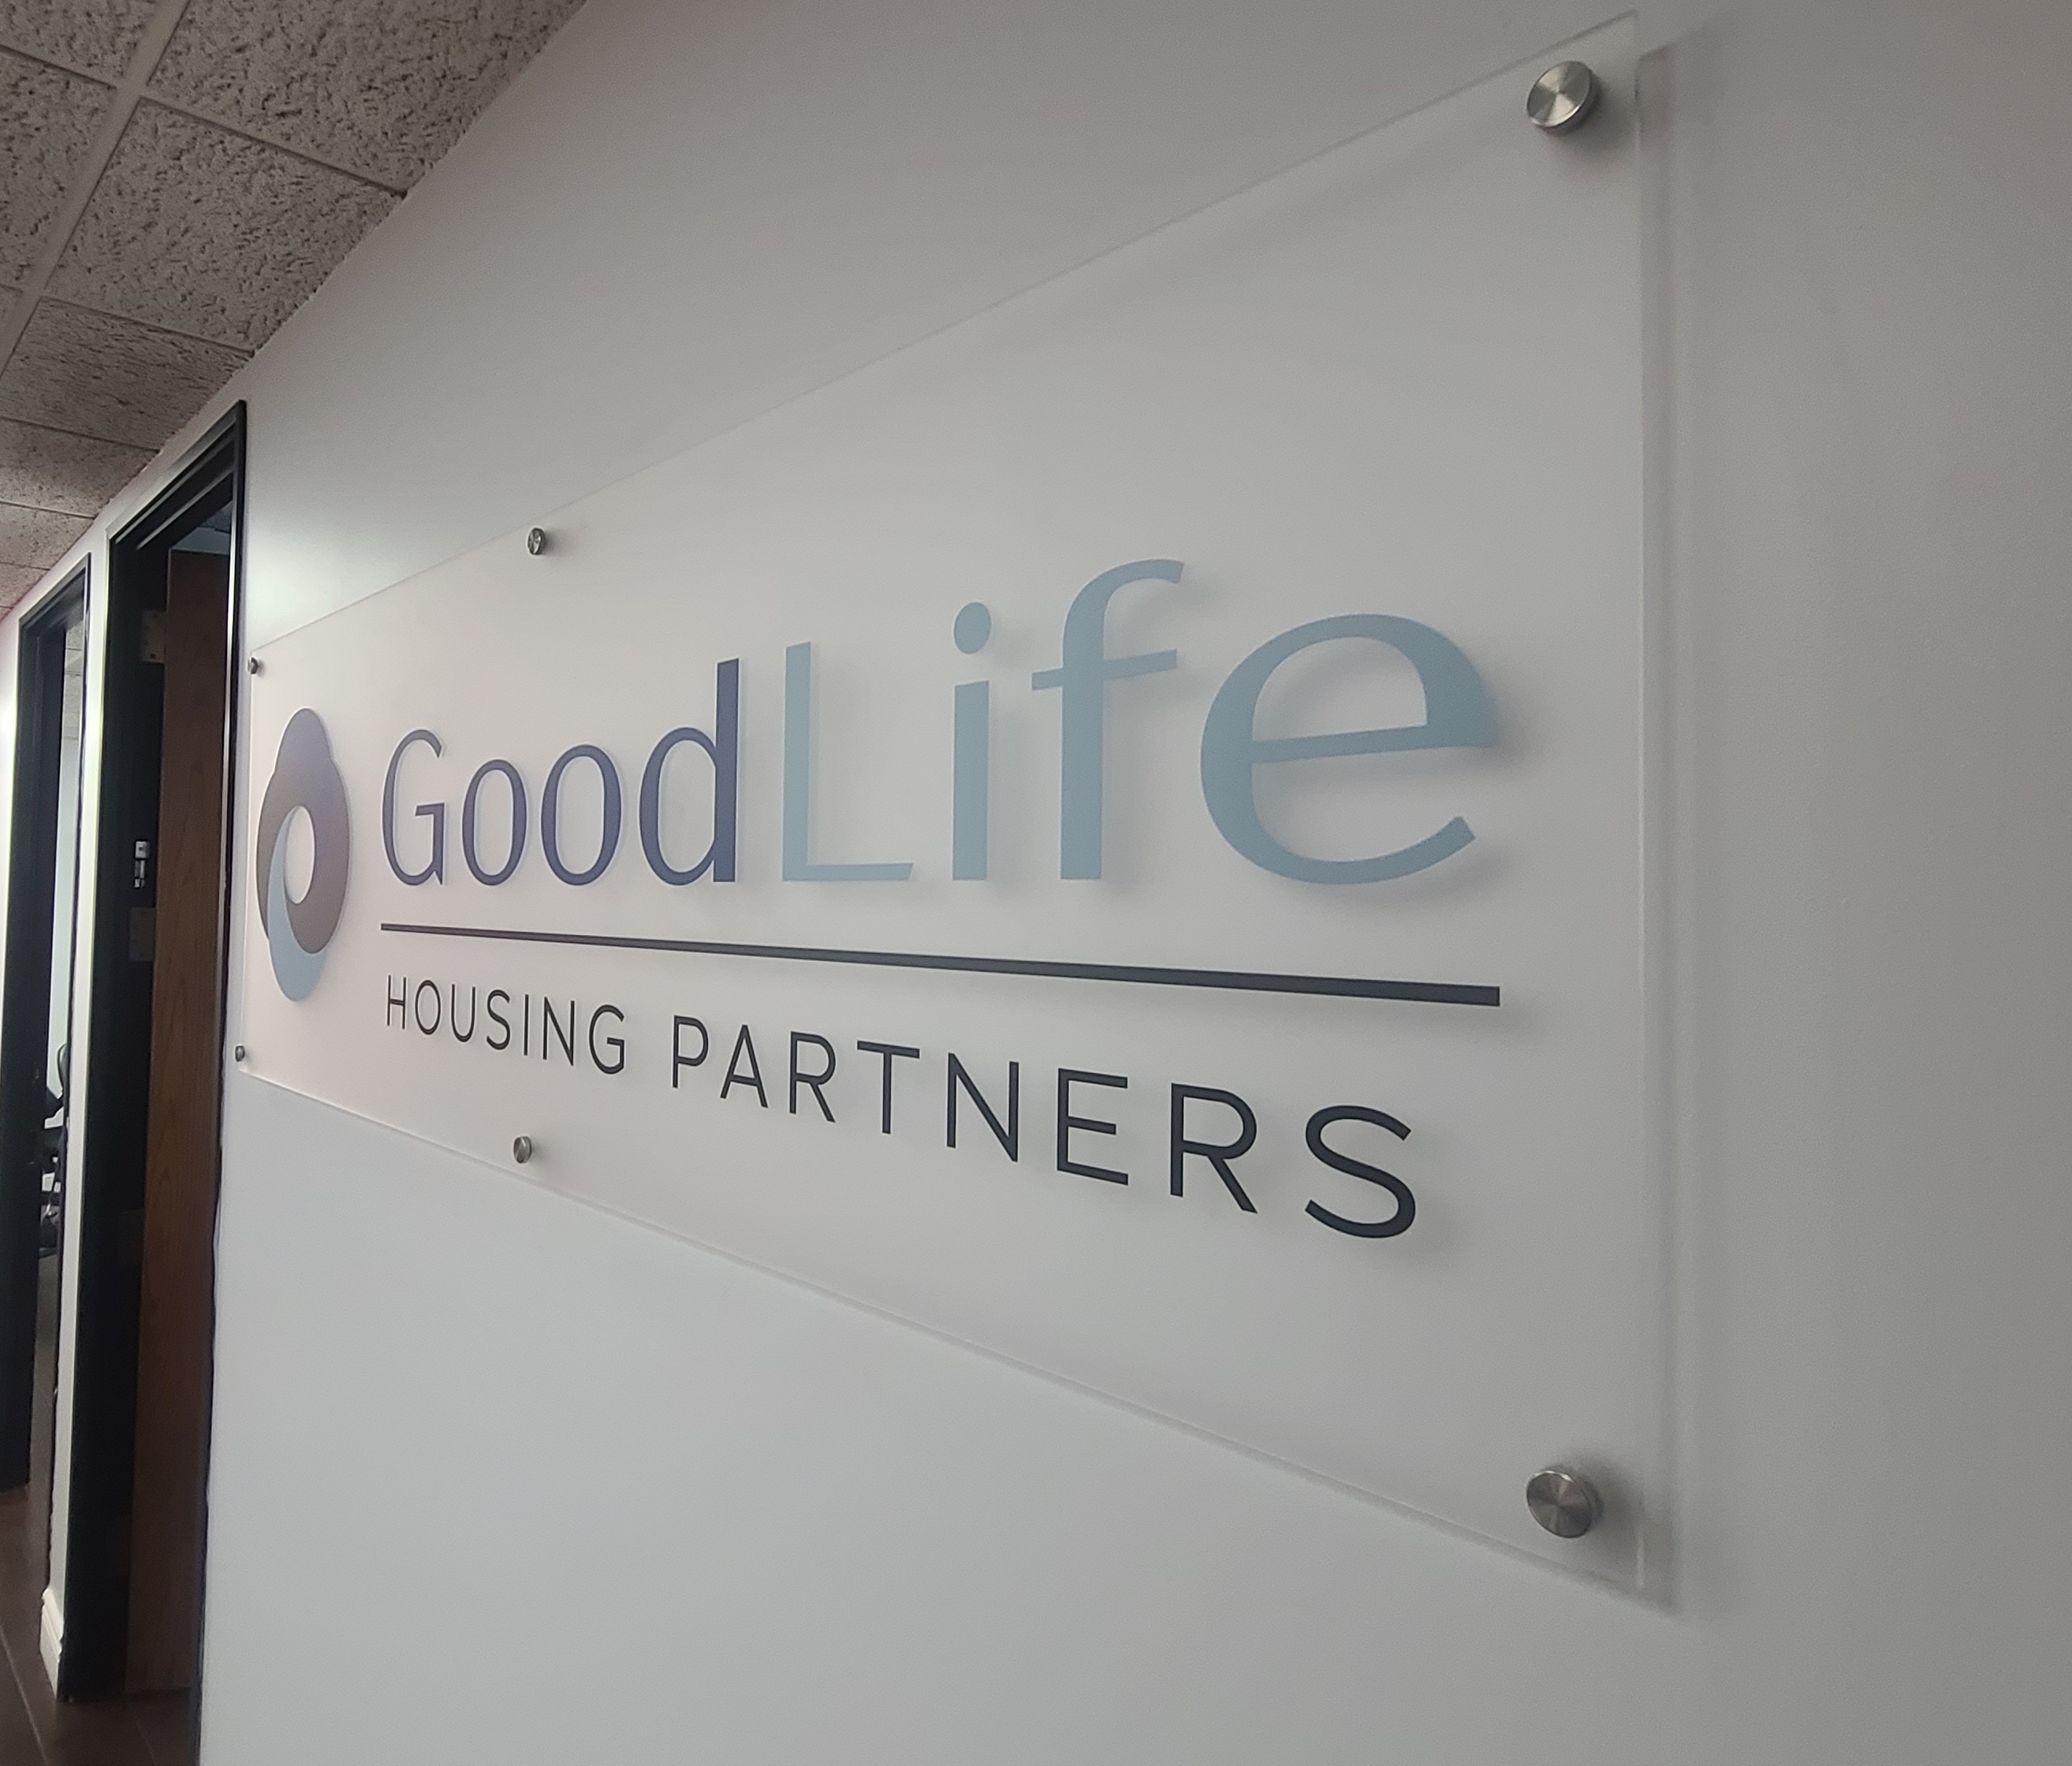 With this acrylic panel lobby sign for their Downtown Los Angeles office, GoodLife Housing will definitely impress those visiting their workplace.